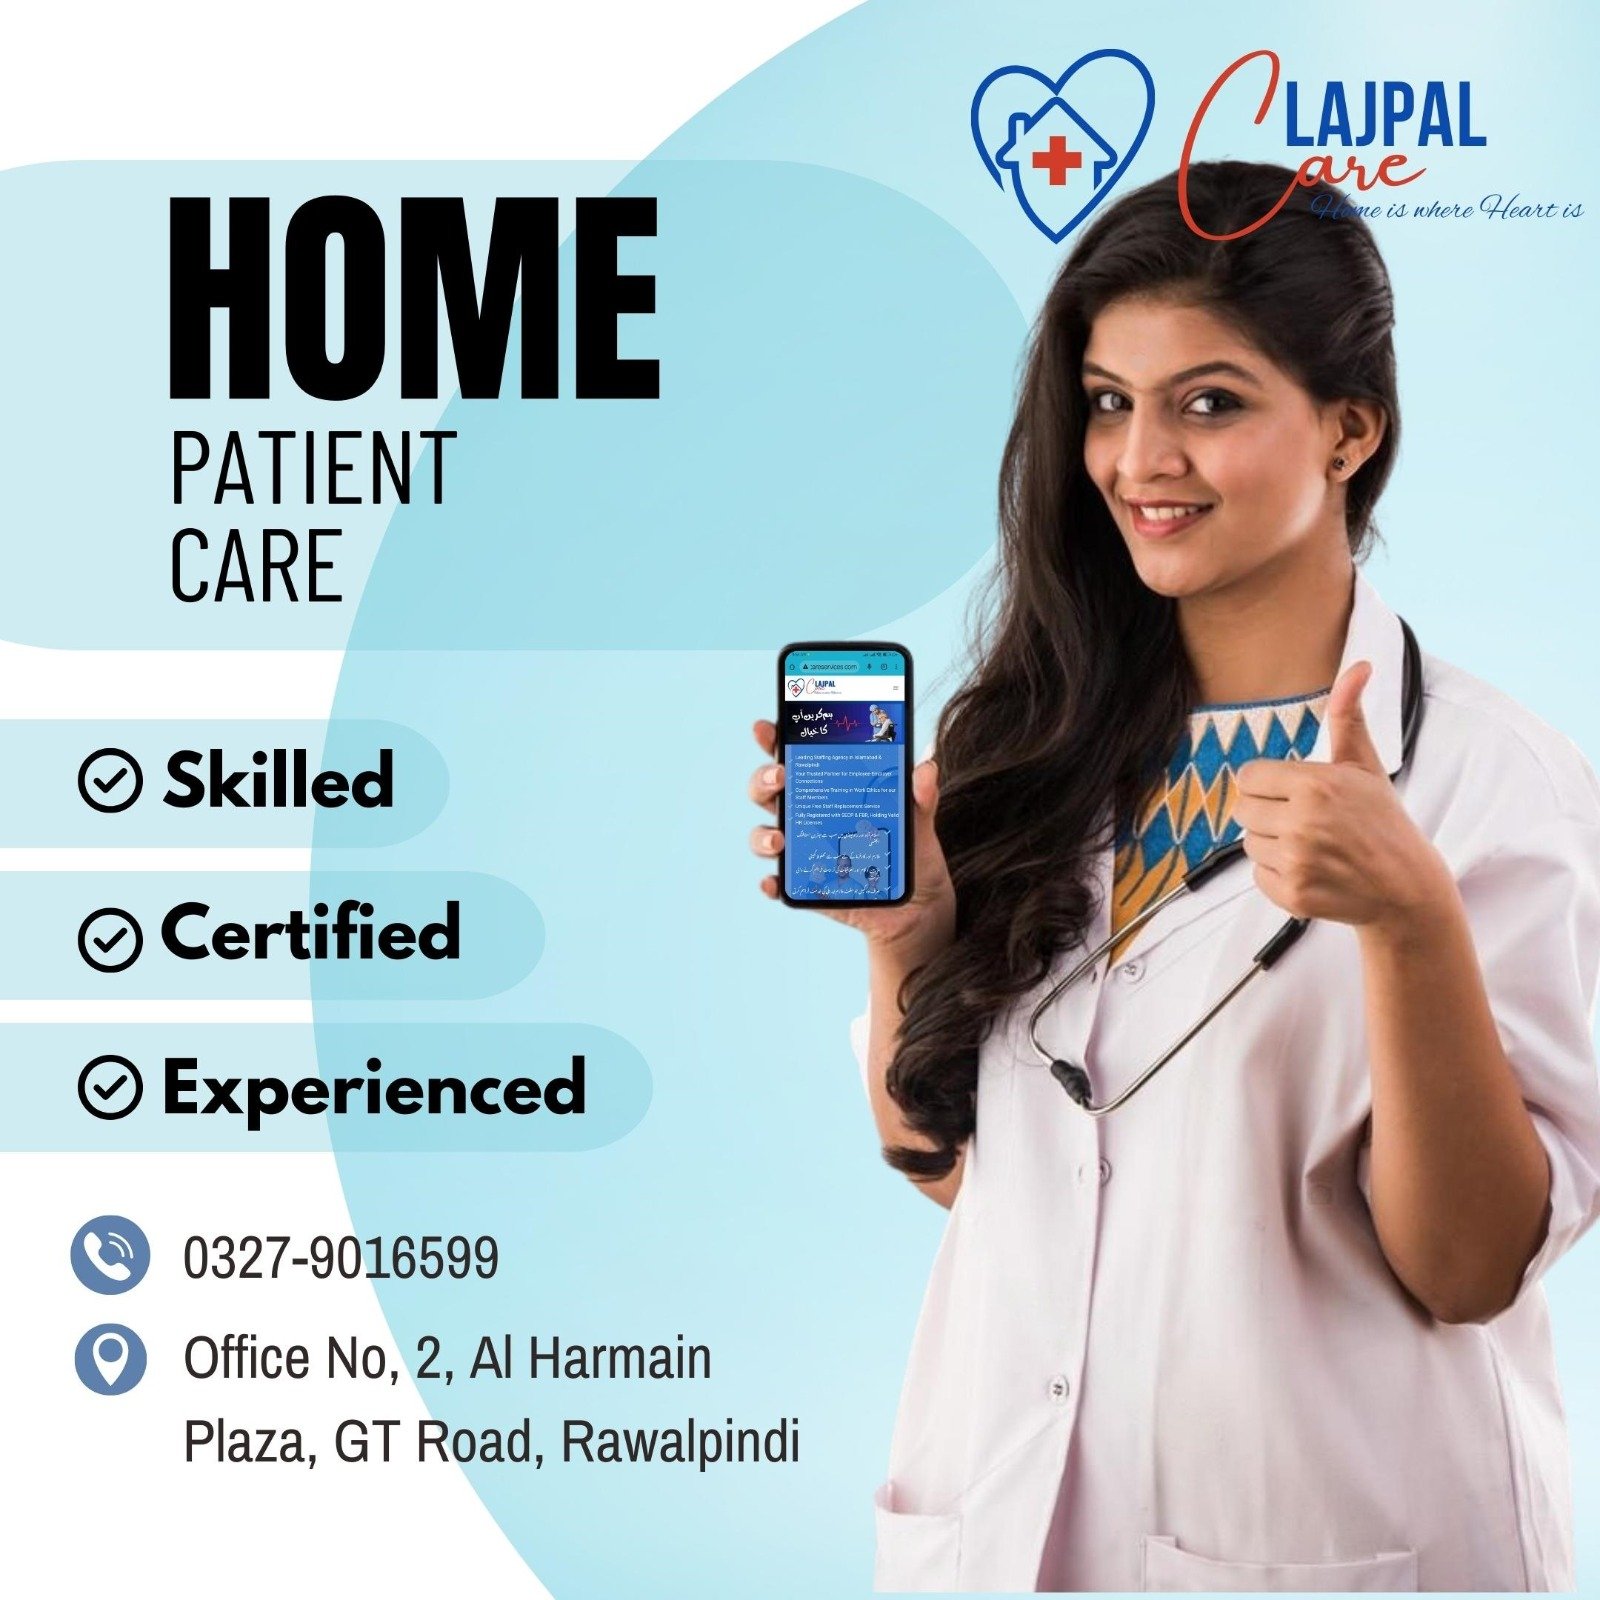 Home Patient Services Tailored to Your Every Need